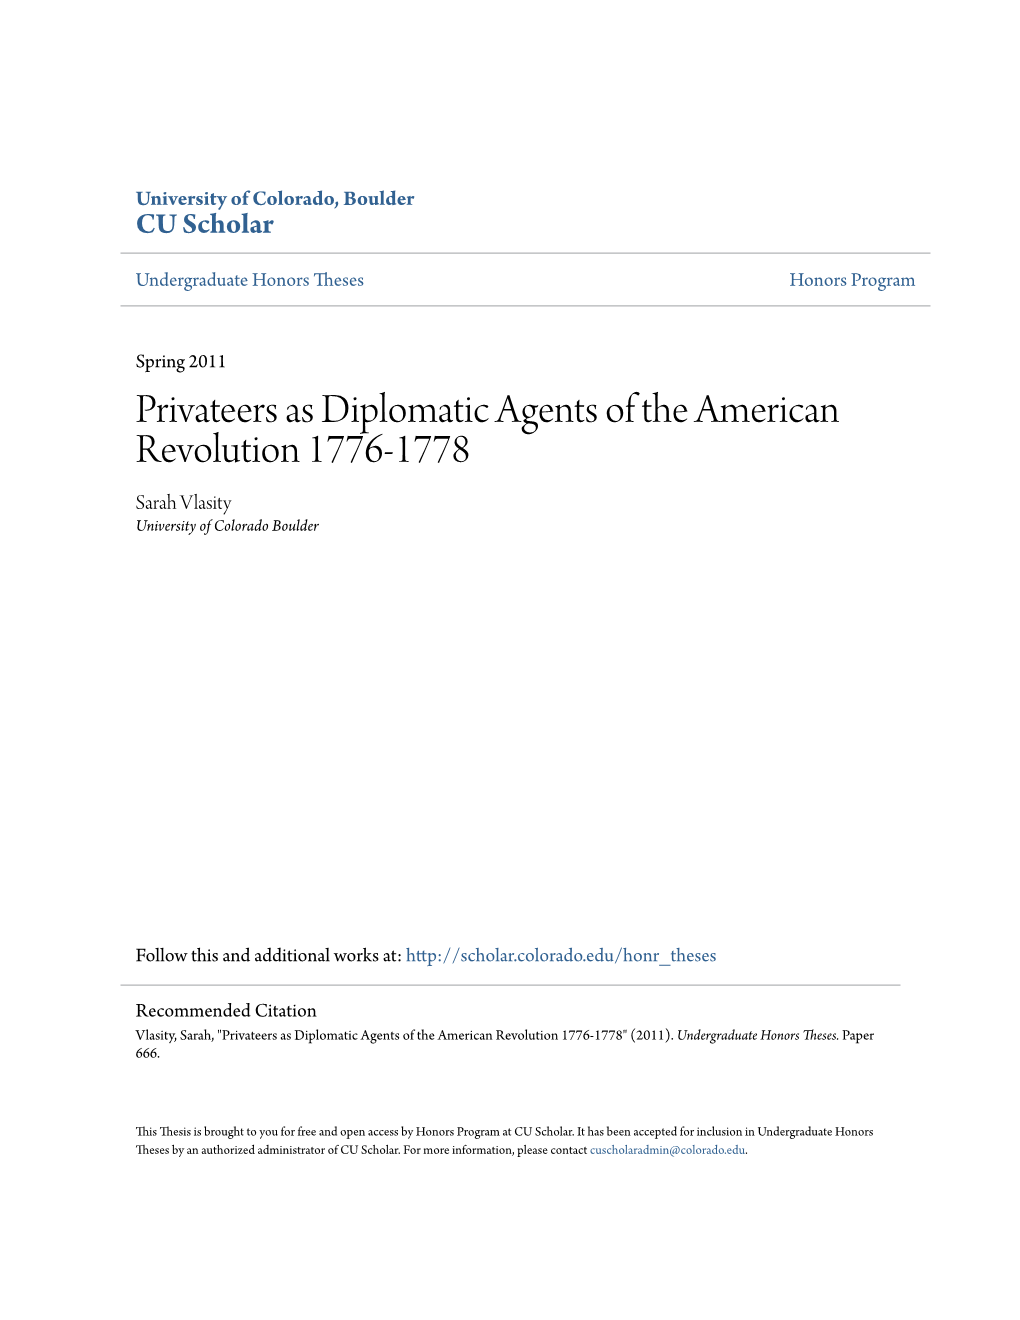 Privateers As Diplomatic Agents of the American Revolution 1776-1778 Sarah Vlasity University of Colorado Boulder